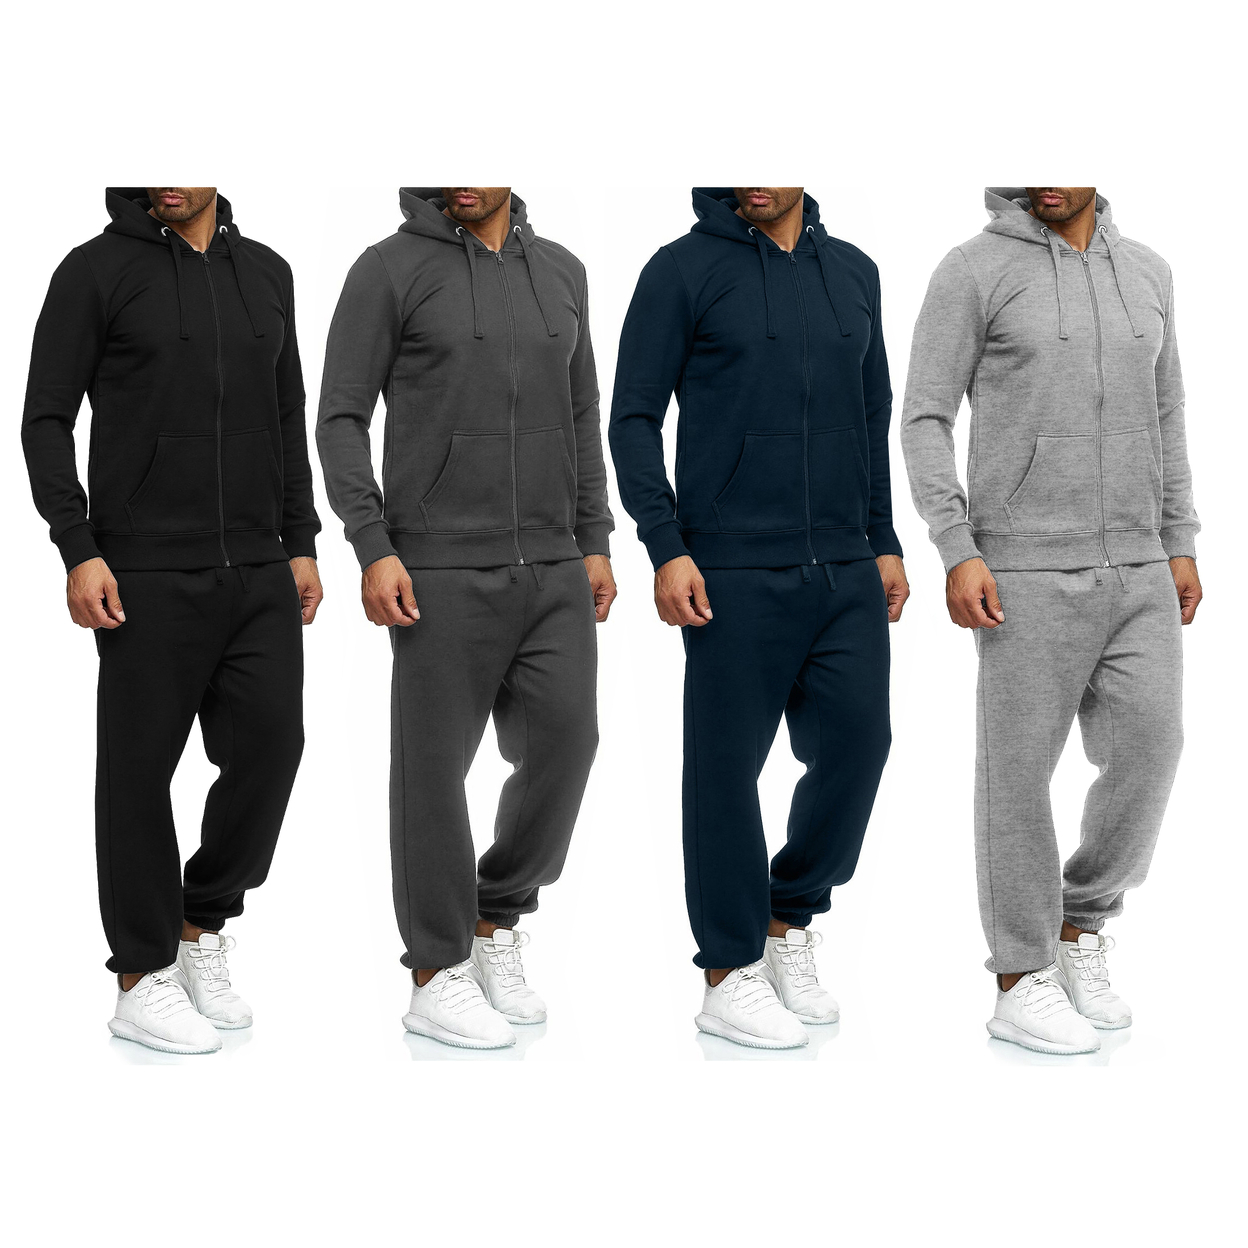 Multi-Pack: Men's Casual Big & Tall Athletic Active Winter Warm Fleece Lined Full Zip Tracksuit Jogger Set - Grey, 2-pack, 3xl